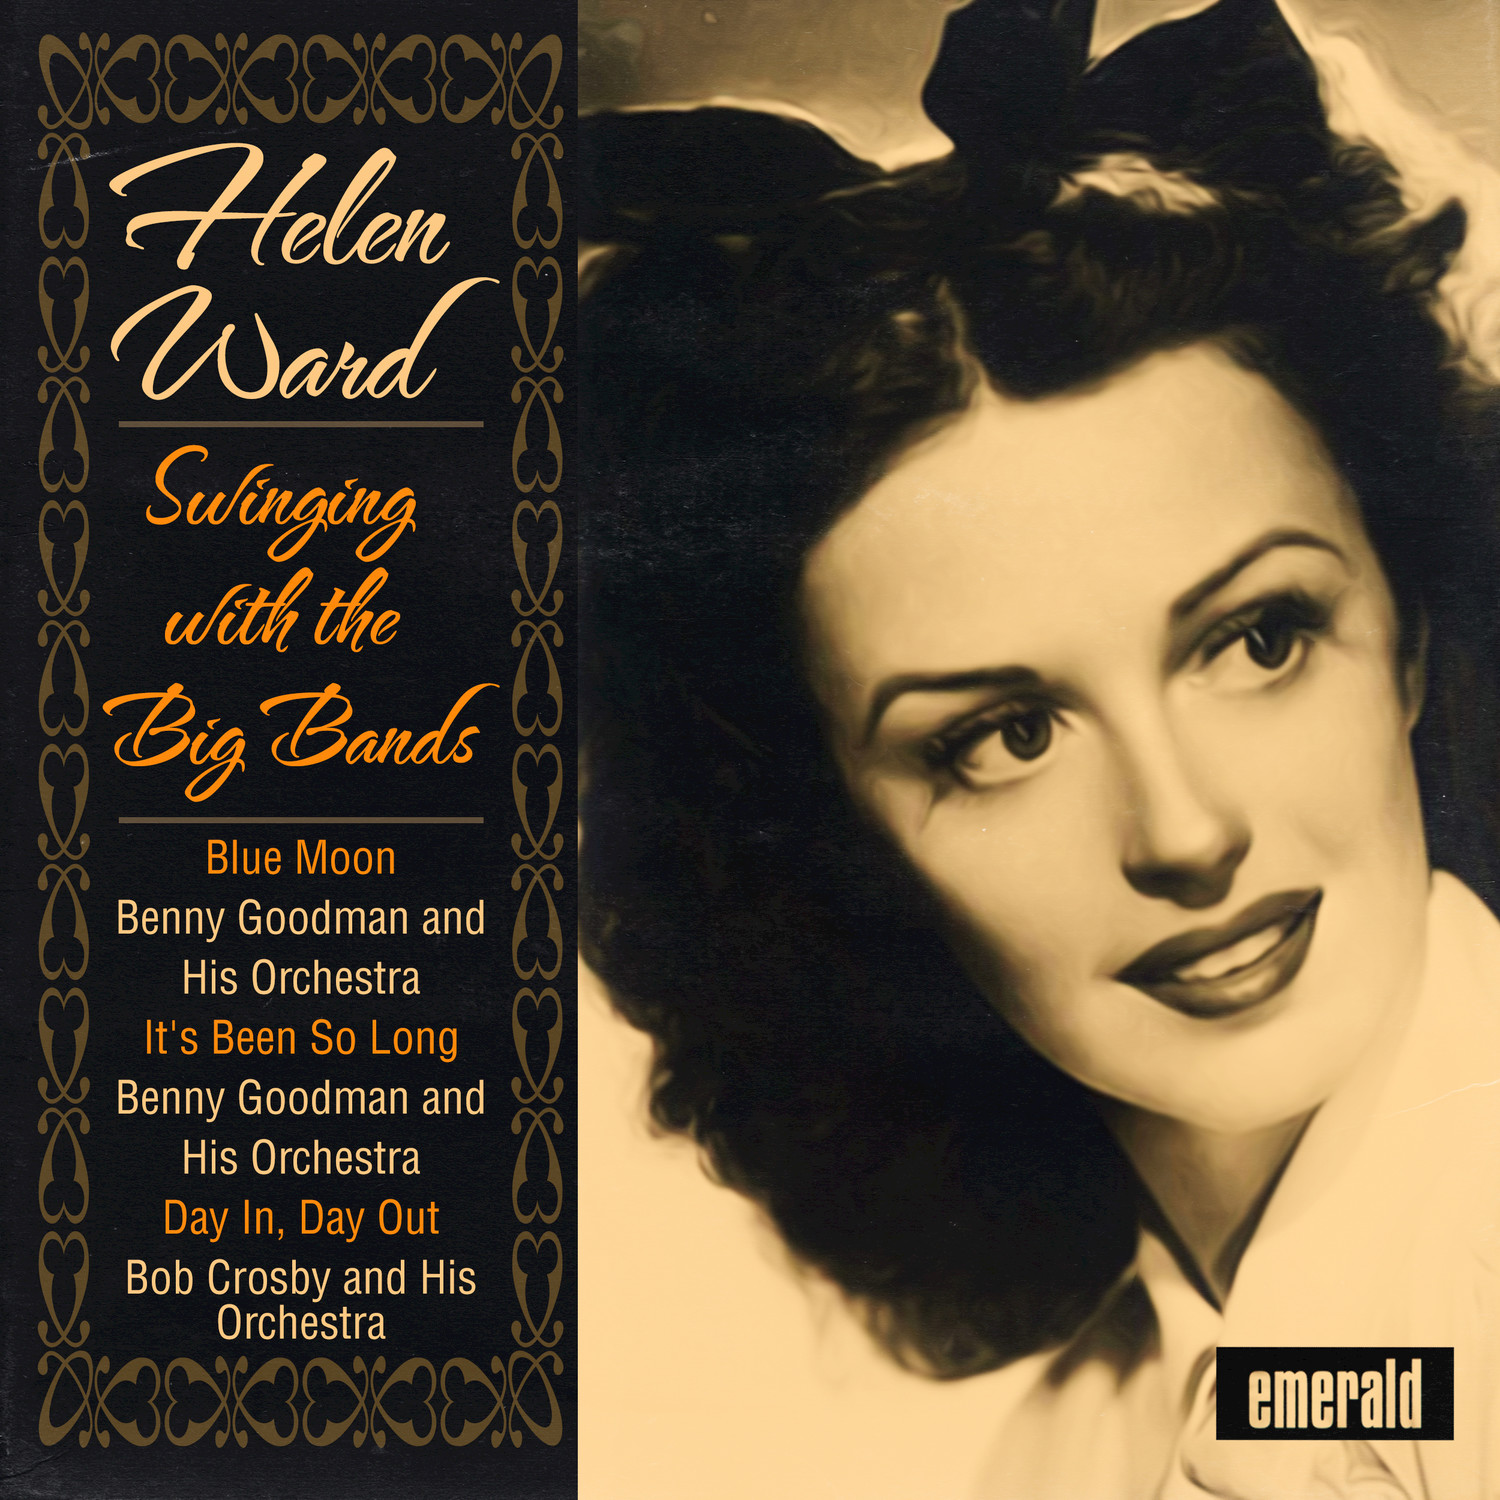 Helen Ward Swinging with the Big Bands